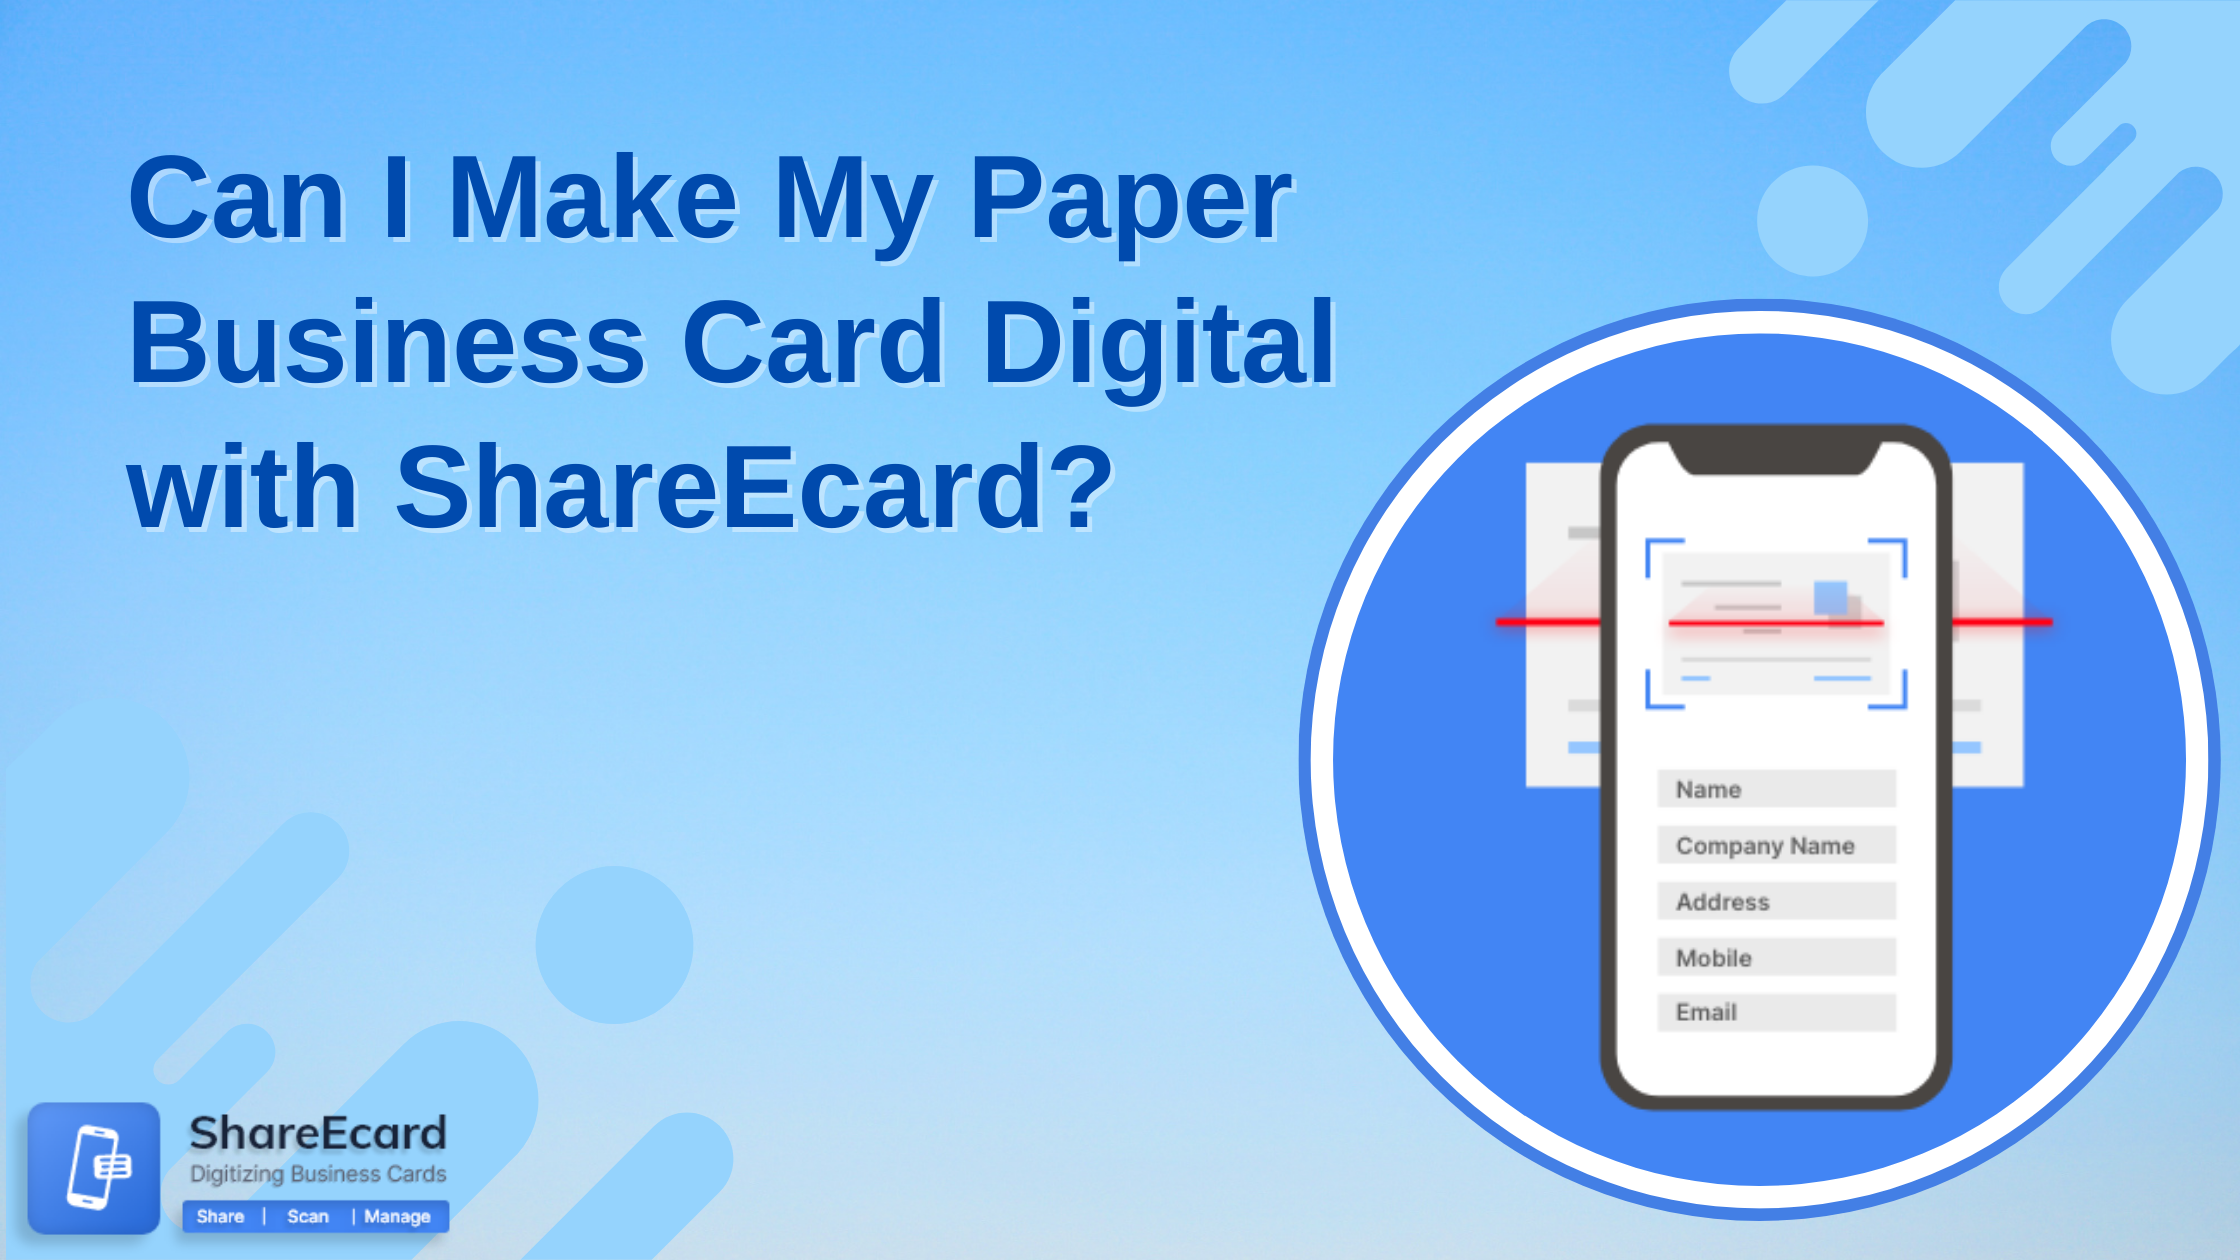 Can I Make My Paper Business Card Digital with ShareEcard